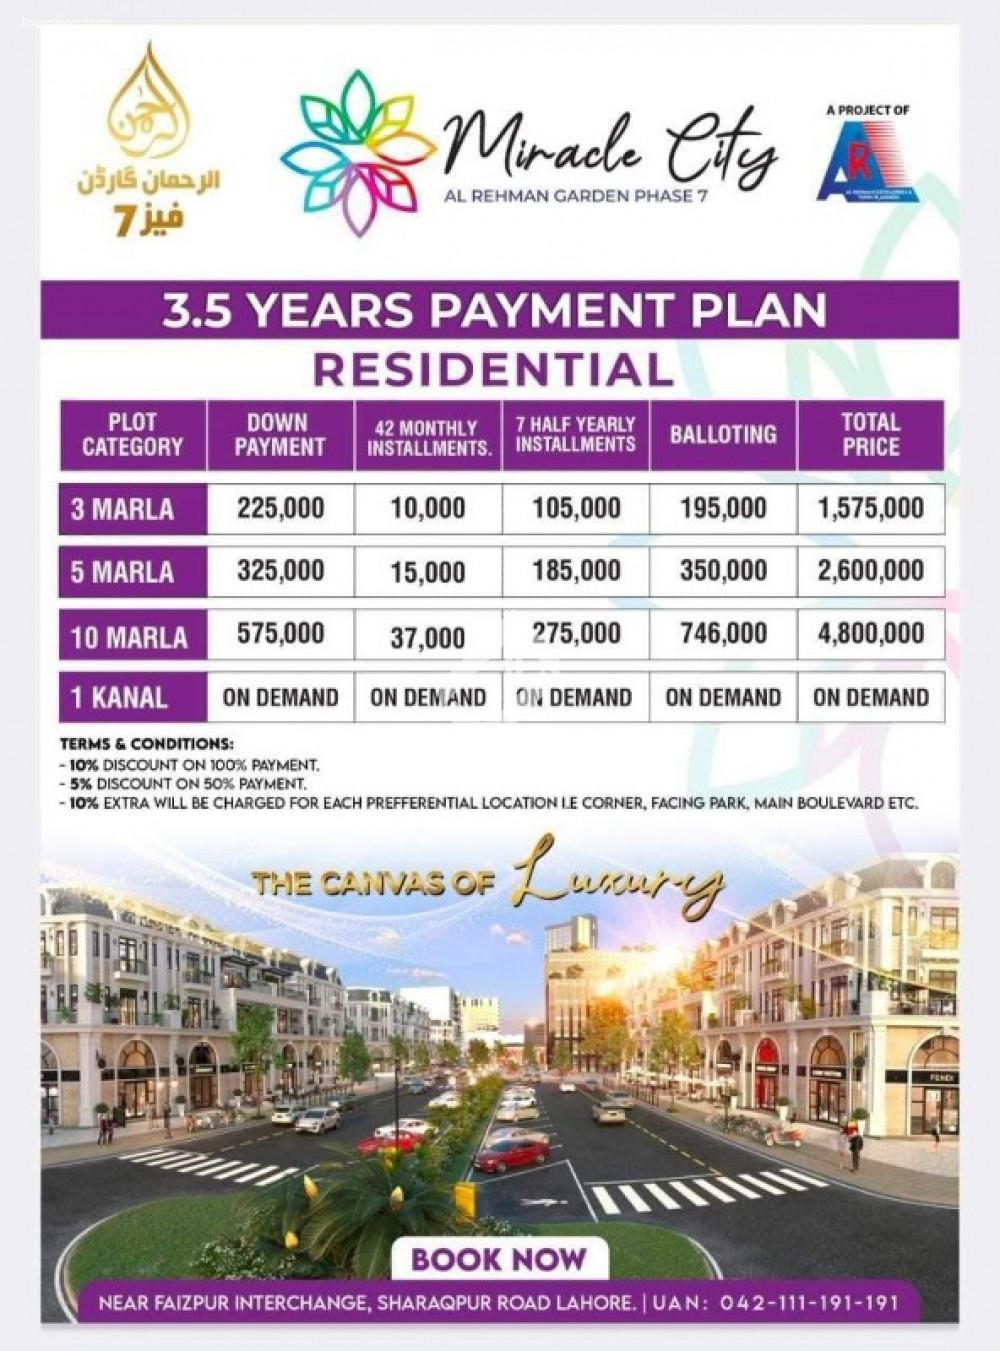 View  3 Marla Residential Plot  For Sale In Al Rehman Garden Phase 7 Block-Miracle City in Al Rehman Garden Phase7, Lahore